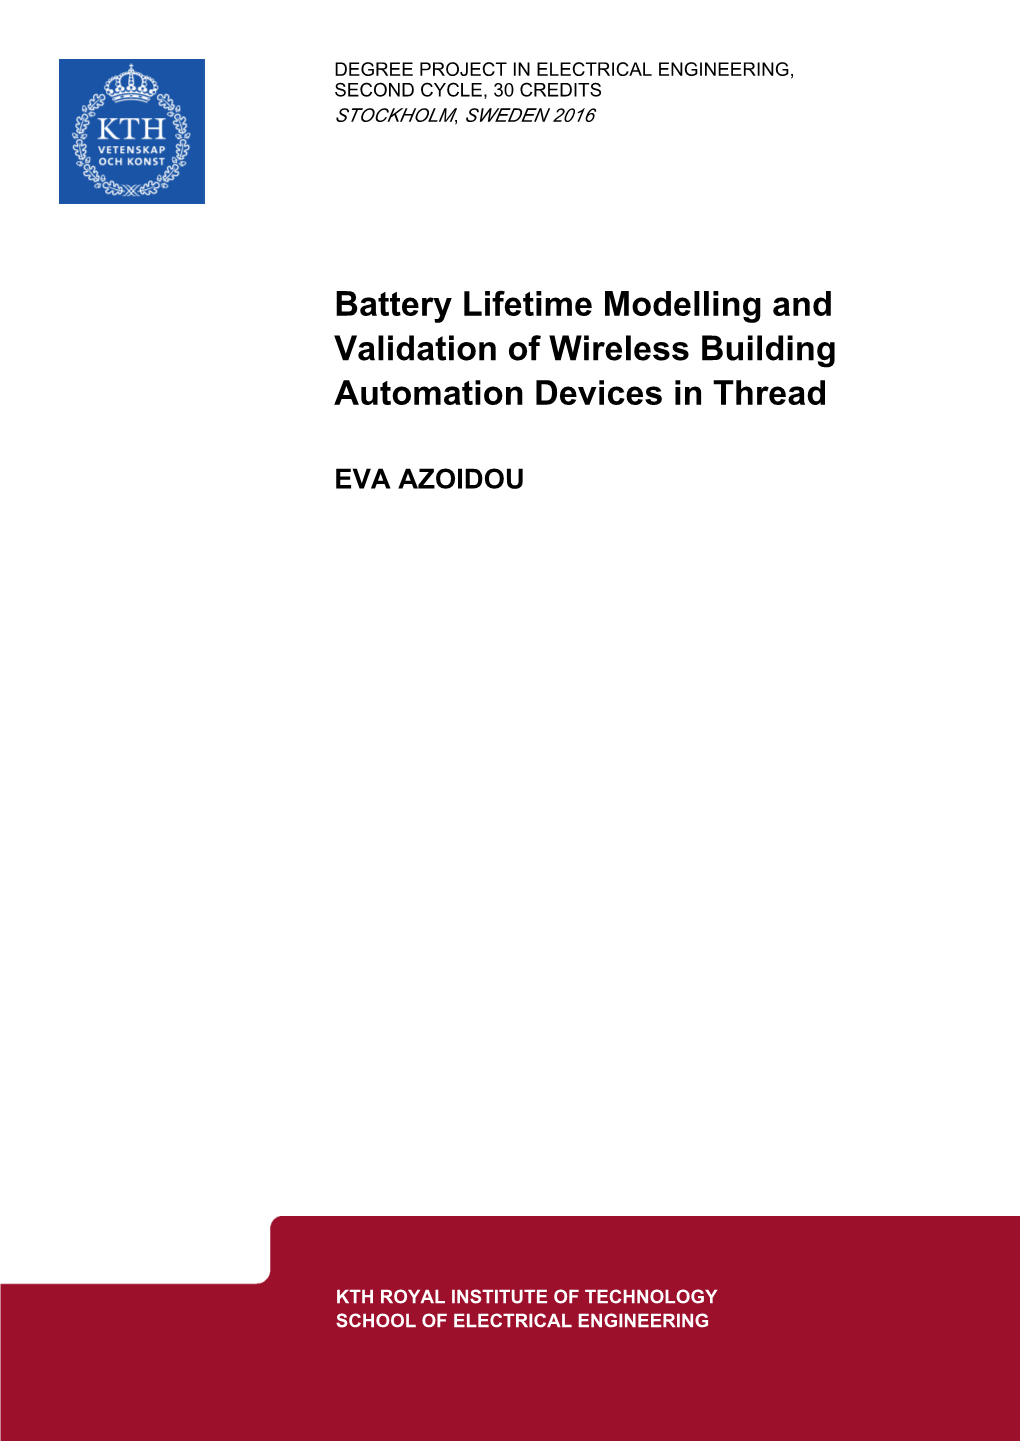 Battery Lifetime Modelling and Validation of Wireless Building Automation Devices in Thread